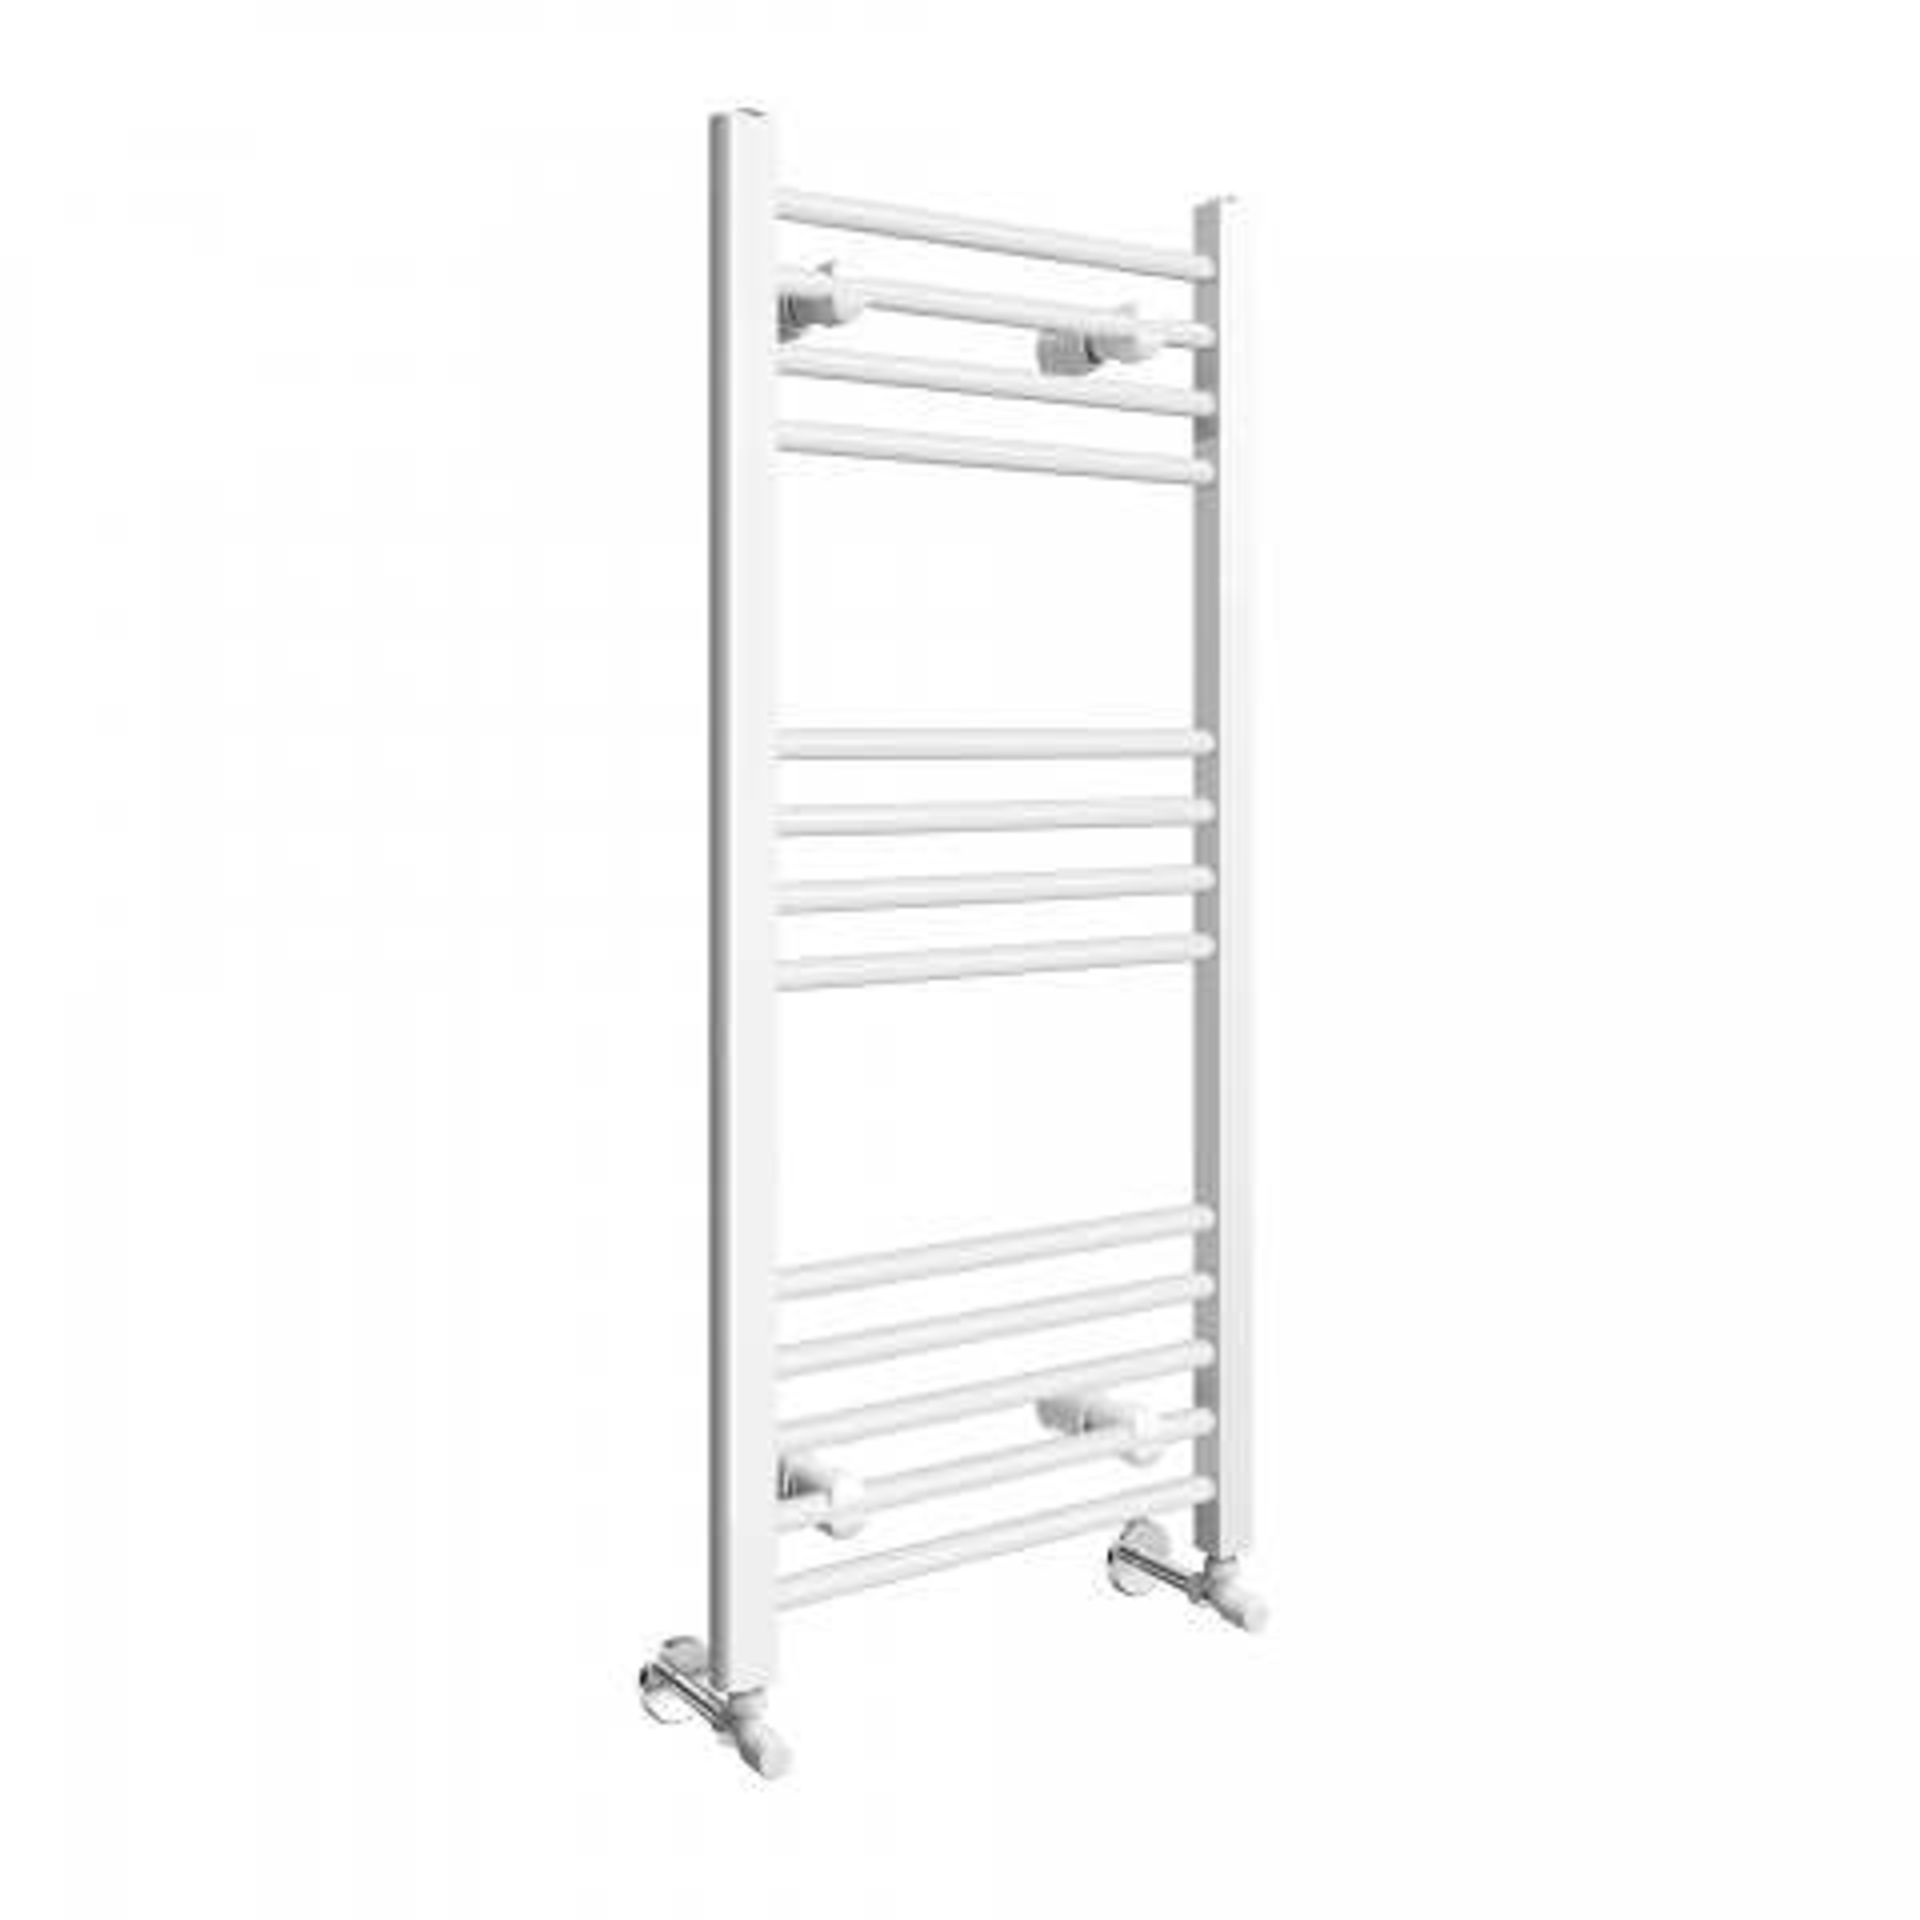 (A234) 1000x450mm White Straight Rail Ladder Towel Radiator Offering durability and style, our Polar - Bild 3 aus 4